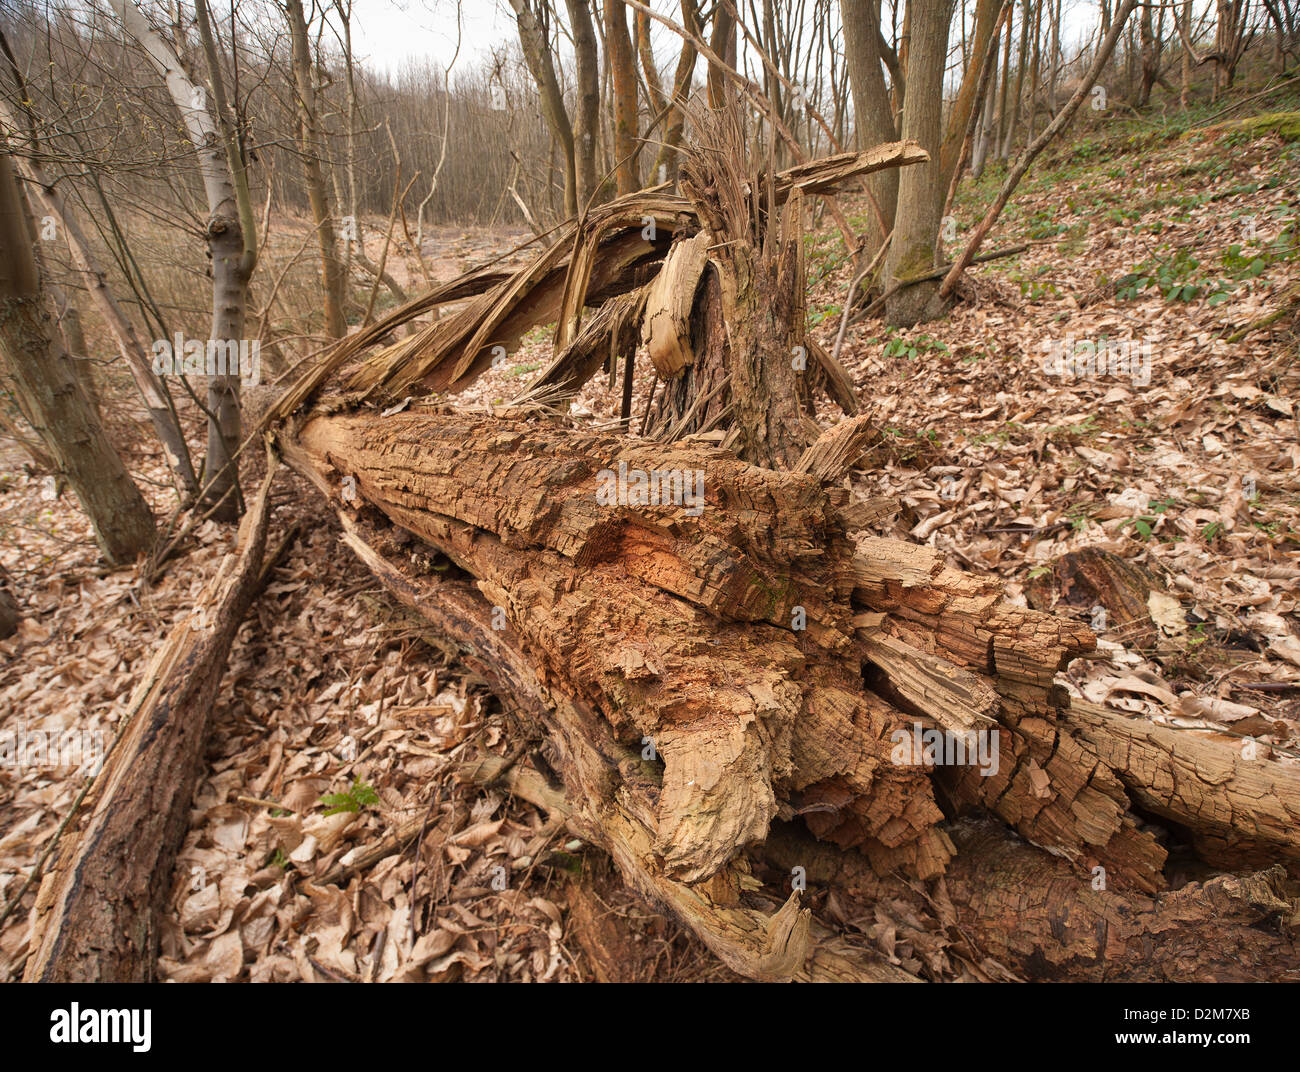 Old rotten tree splintered base from being blown over in the wind bark splinter and debris from spruce tree Stock Photo